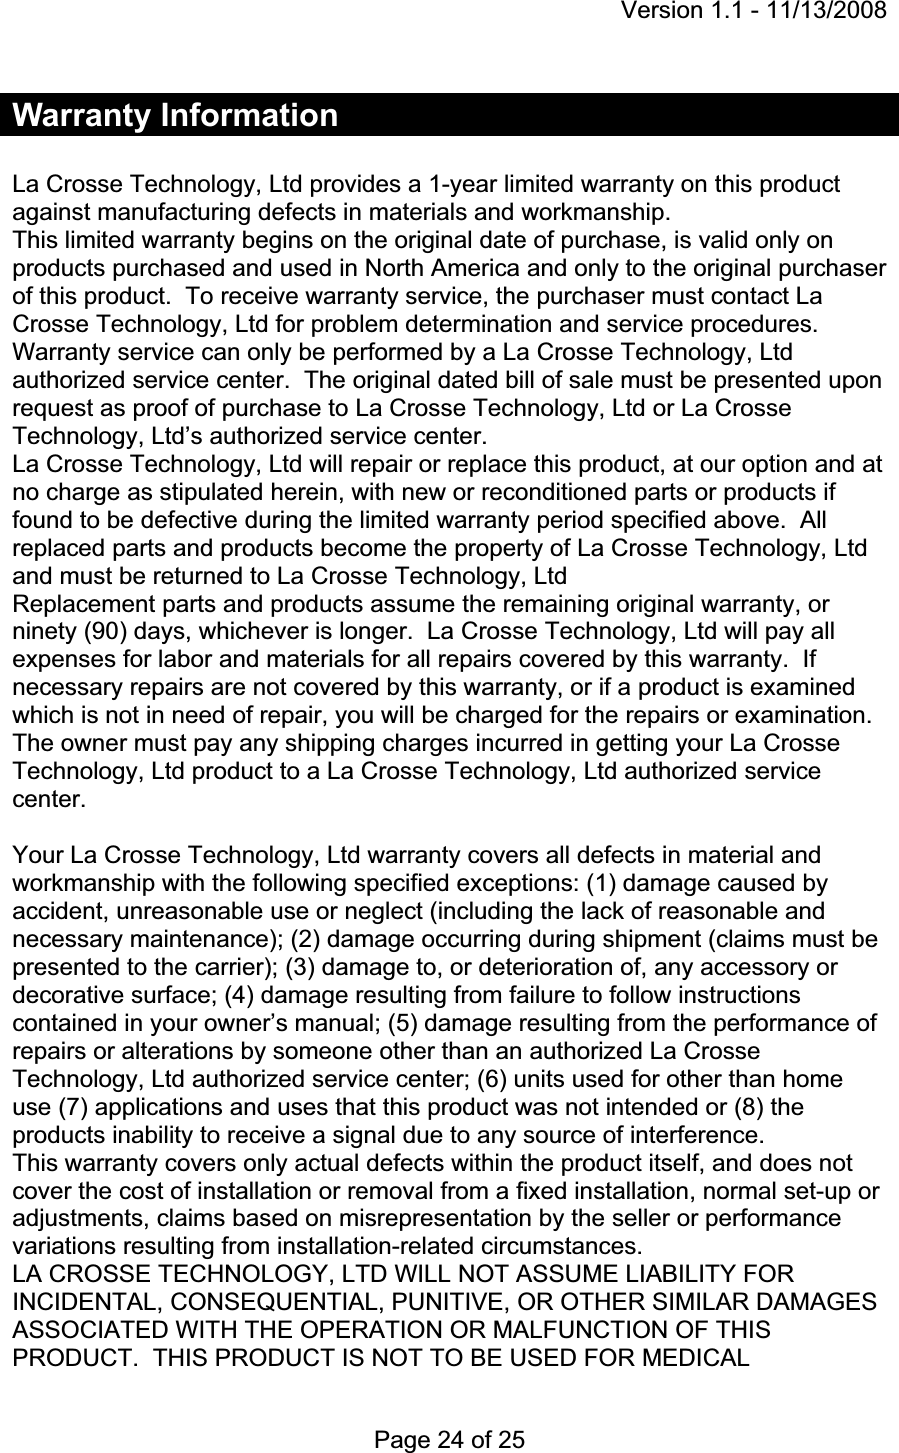 Version 1.1 - 11/13/2008 Page 24 of 25 Warranty Information La Crosse Technology, Ltd provides a 1-year limited warranty on this product against manufacturing defects in materials and workmanship. This limited warranty begins on the original date of purchase, is valid only on products purchased and used in North America and only to the original purchaser of this product.  To receive warranty service, the purchaser must contact La Crosse Technology, Ltd for problem determination and service procedures.Warranty service can only be performed by a La Crosse Technology, Ltd authorized service center.  The original dated bill of sale must be presented upon request as proof of purchase to La Crosse Technology, Ltd or La Crosse Technology, Ltd’s authorized service center. La Crosse Technology, Ltd will repair or replace this product, at our option and at no charge as stipulated herein, with new or reconditioned parts or products if found to be defective during the limited warranty period specified above.  All replaced parts and products become the property of La Crosse Technology, Ltd and must be returned to La Crosse Technology, LtdReplacement parts and products assume the remaining original warranty, or ninety (90) days, whichever is longer.  La Crosse Technology, Ltd will pay all expenses for labor and materials for all repairs covered by this warranty.  If necessary repairs are not covered by this warranty, or if a product is examined which is not in need of repair, you will be charged for the repairs or examination.   The owner must pay any shipping charges incurred in getting your La Crosse Technology, Ltd product to a La Crosse Technology, Ltd authorized service center.Your La Crosse Technology, Ltd warranty covers all defects in material and workmanship with the following specified exceptions: (1) damage caused by accident, unreasonable use or neglect (including the lack of reasonable and necessary maintenance); (2) damage occurring during shipment (claims must be presented to the carrier); (3) damage to, or deterioration of, any accessory or decorative surface; (4) damage resulting from failure to follow instructions contained in your owner’s manual; (5) damage resulting from the performance of repairs or alterations by someone other than an authorized La Crosse Technology, Ltd authorized service center; (6) units used for other than home use (7) applications and uses that this product was not intended or (8) the products inability to receive a signal due to any source of interference. This warranty covers only actual defects within the product itself, and does not cover the cost of installation or removal from a fixed installation, normal set-up or adjustments, claims based on misrepresentation by the seller or performance variations resulting from installation-related circumstances. LA CROSSE TECHNOLOGY, LTD WILL NOT ASSUME LIABILITY FOR INCIDENTAL, CONSEQUENTIAL, PUNITIVE, OR OTHER SIMILAR DAMAGES ASSOCIATED WITH THE OPERATION OR MALFUNCTION OF THIS PRODUCT.  THIS PRODUCT IS NOT TO BE USED FOR MEDICAL 